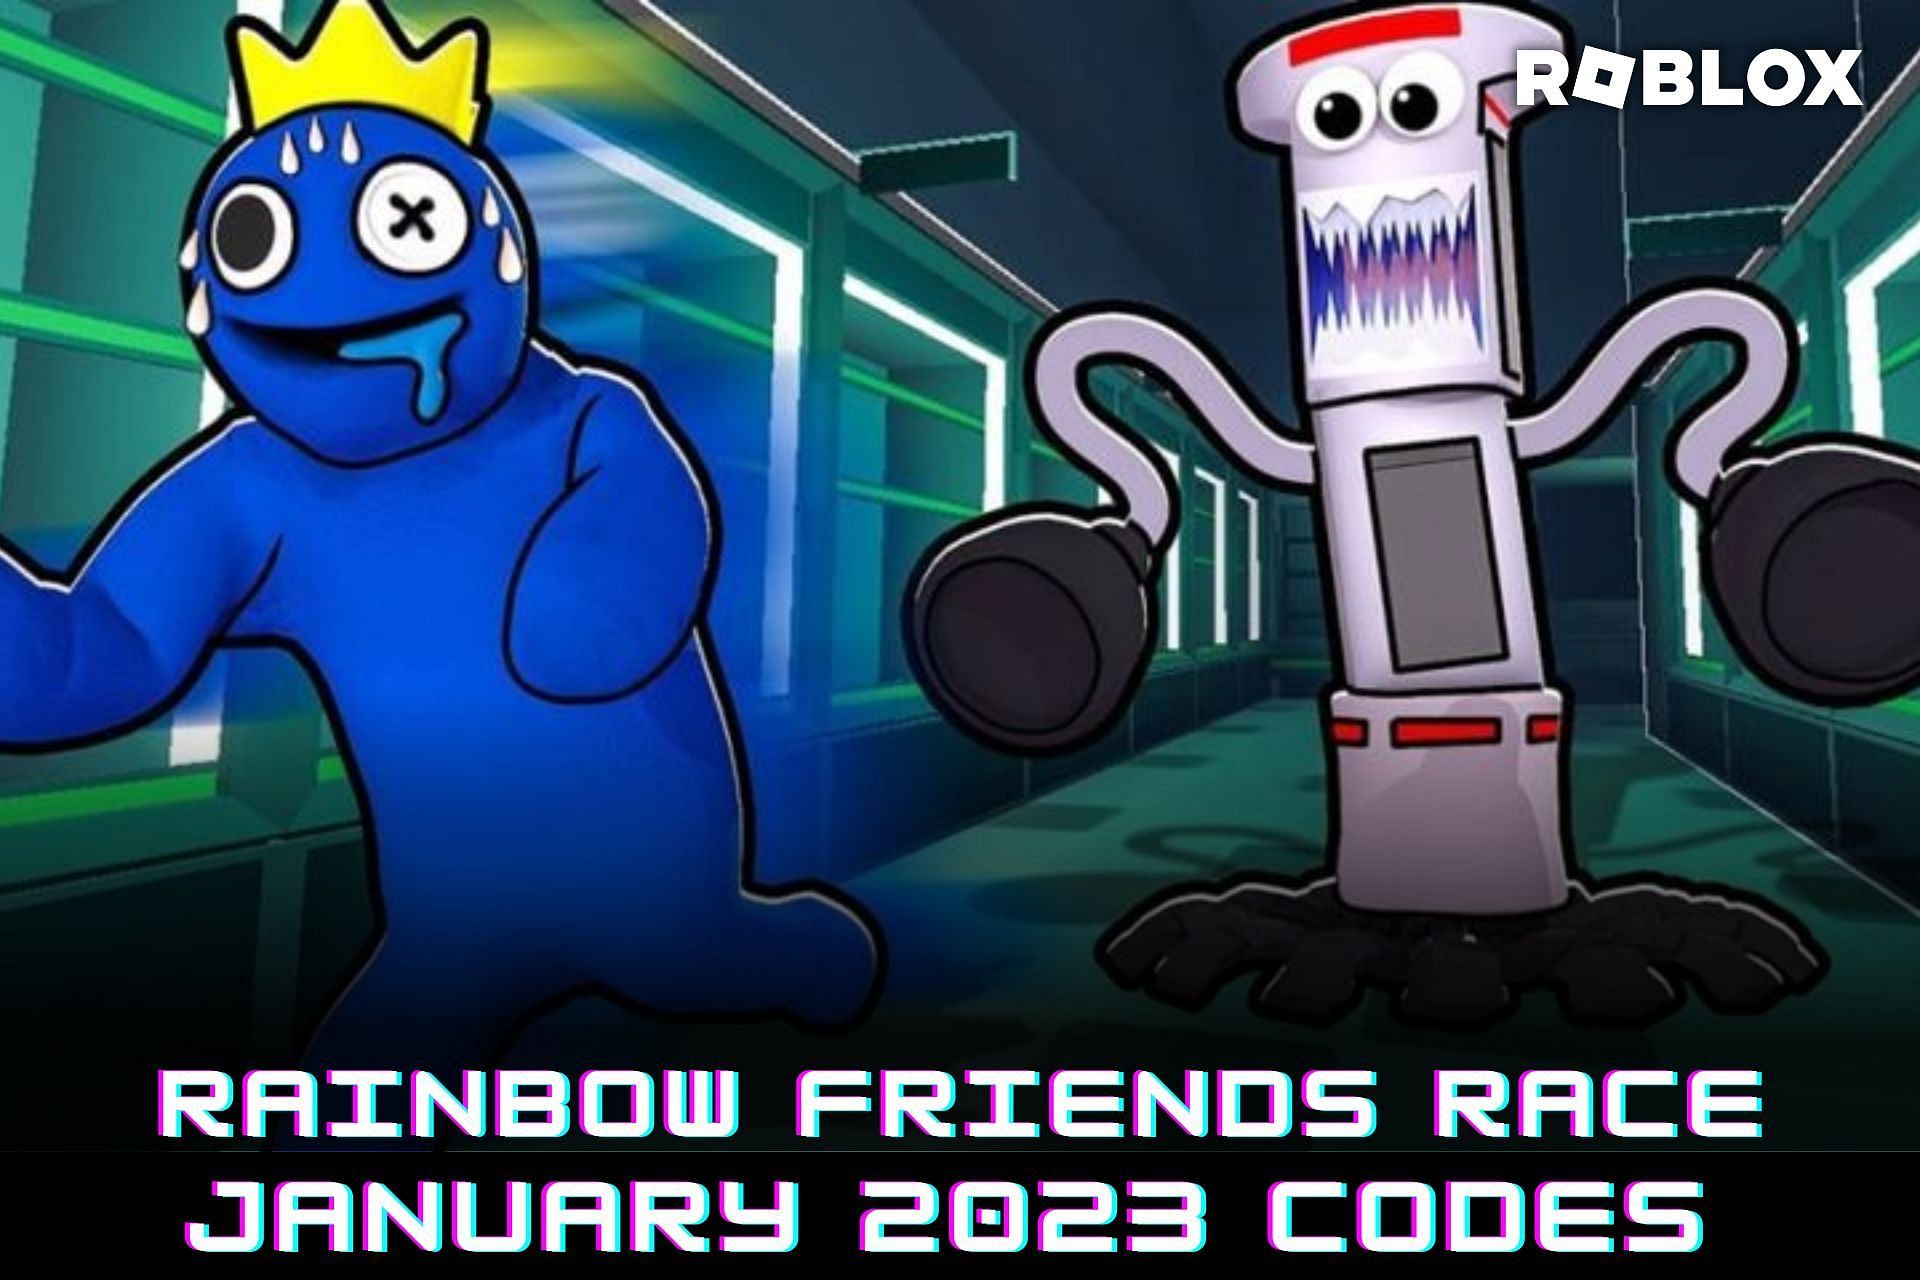 Roblox Rainbow Friends Race codes for January 2023 Free wins